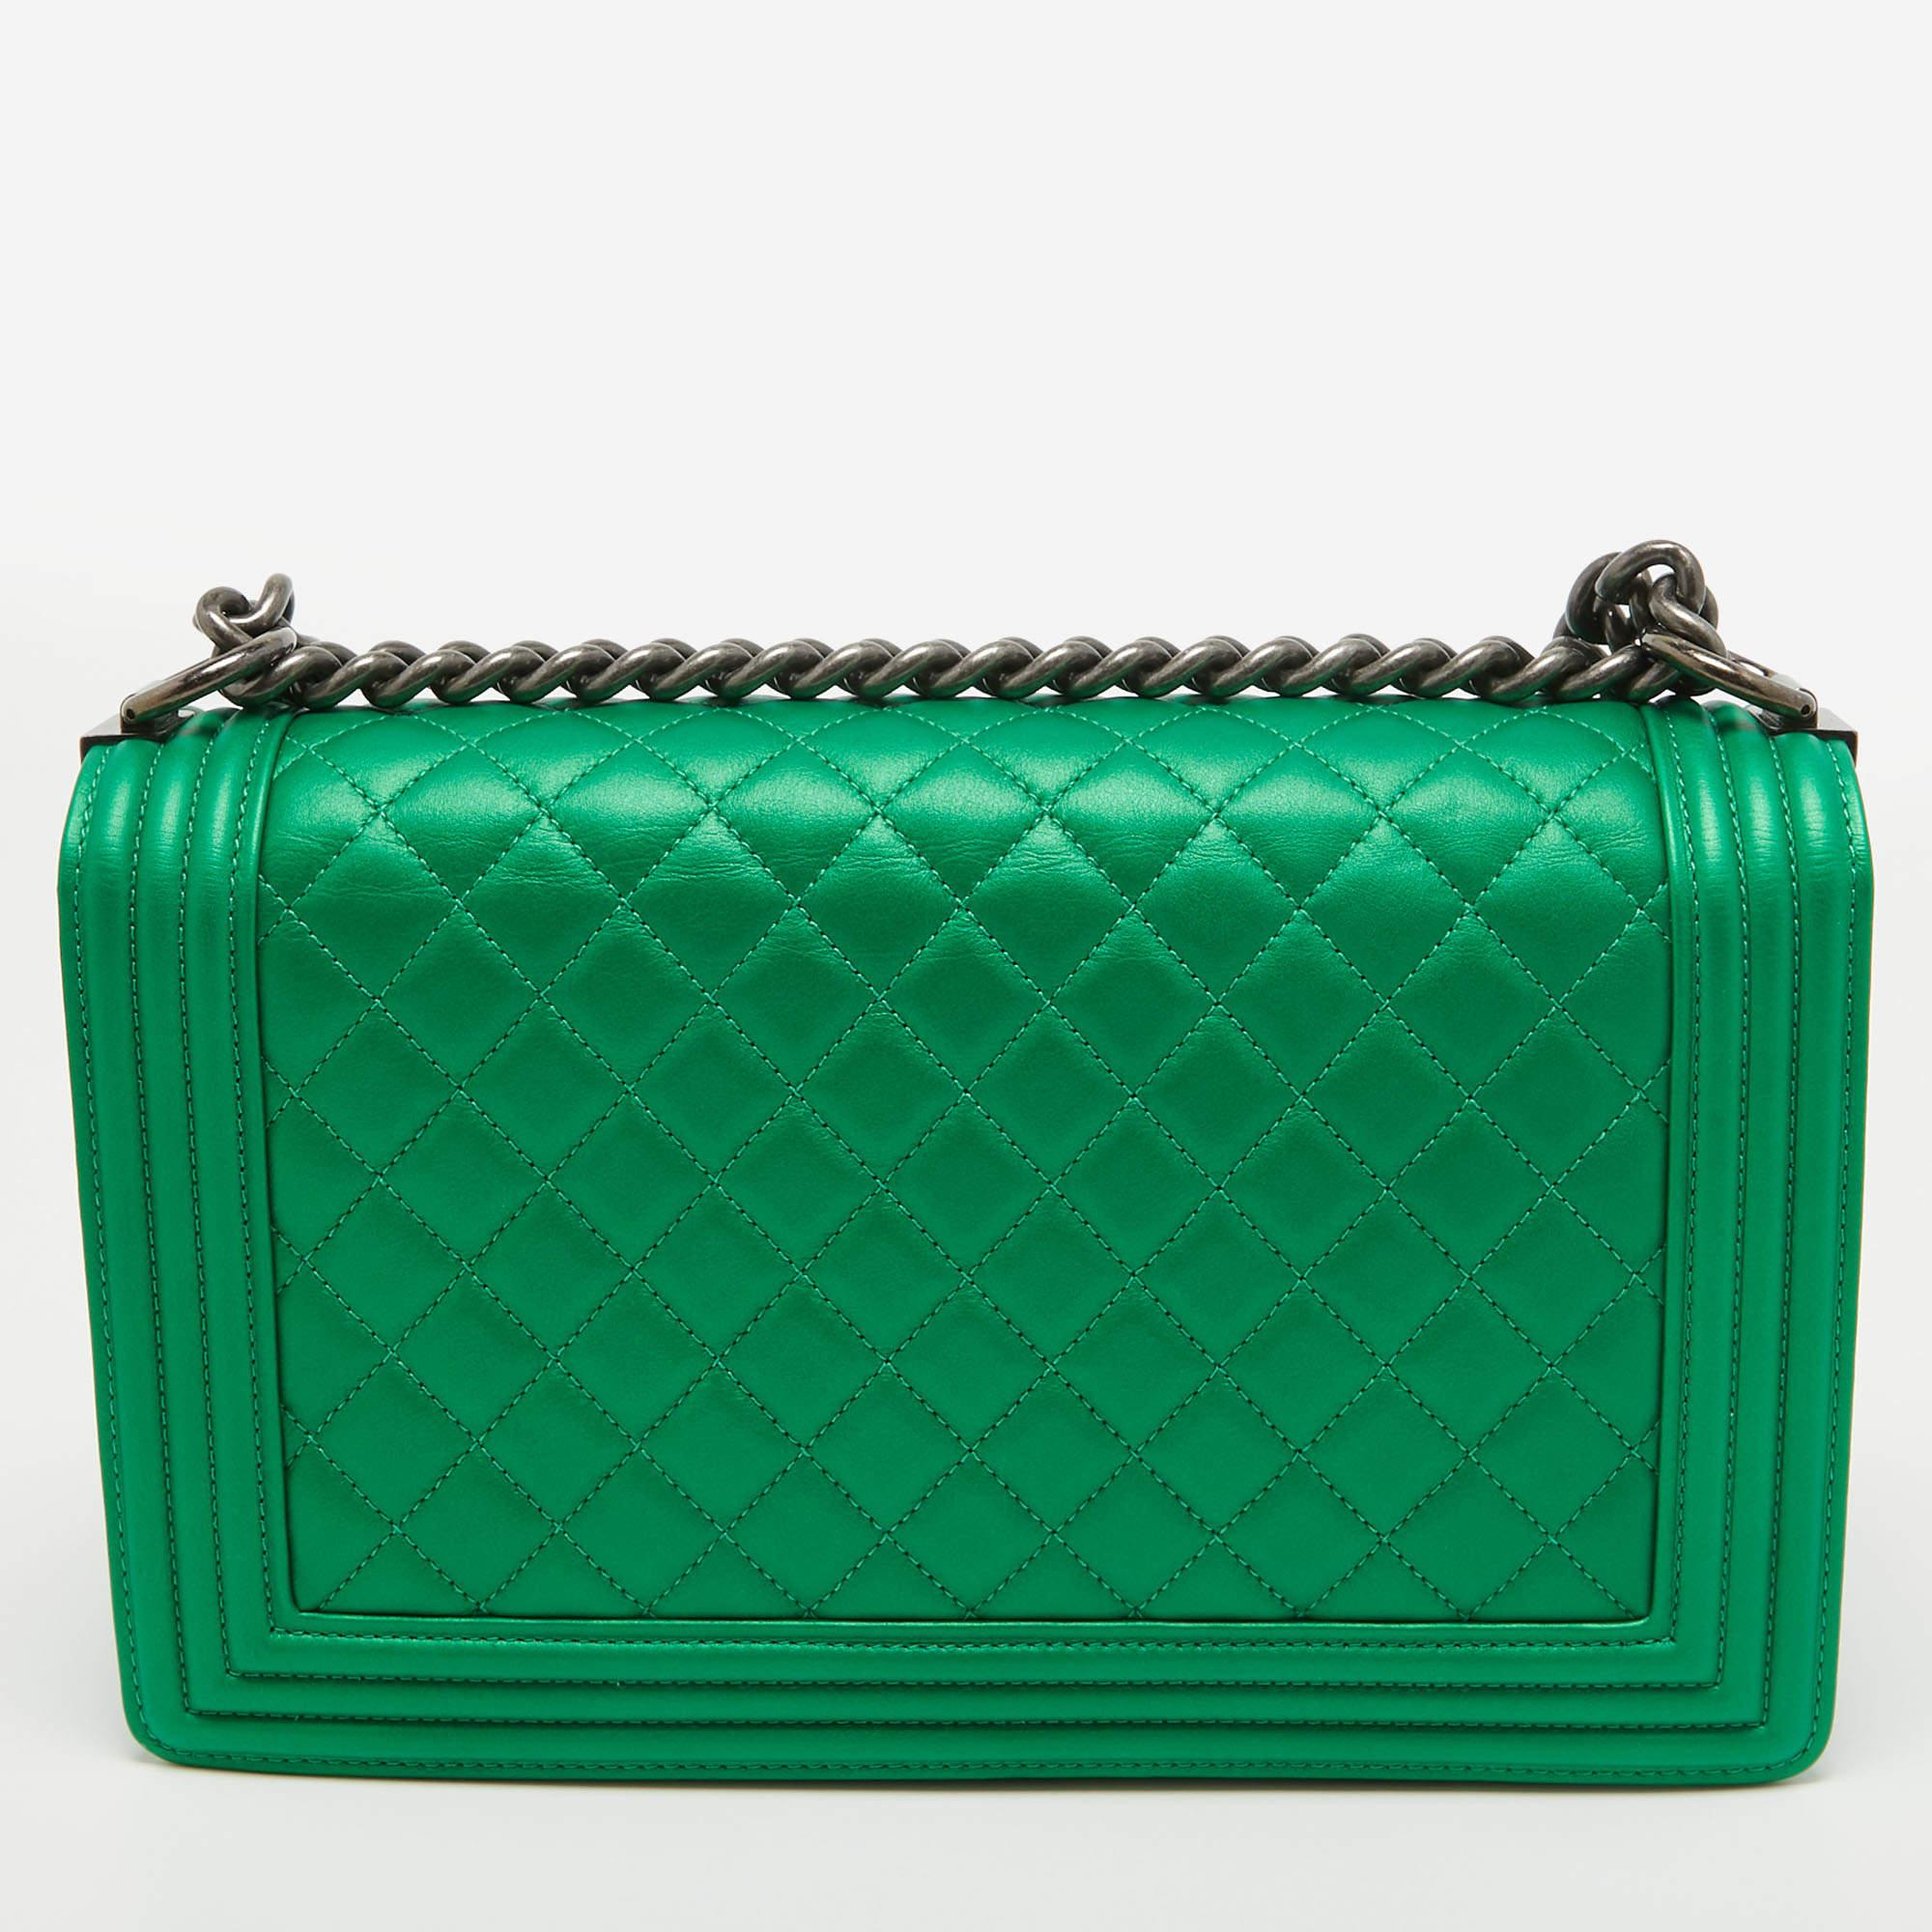 Chanel Metallic Green Quilted Leather New Medium Boy Bag 5